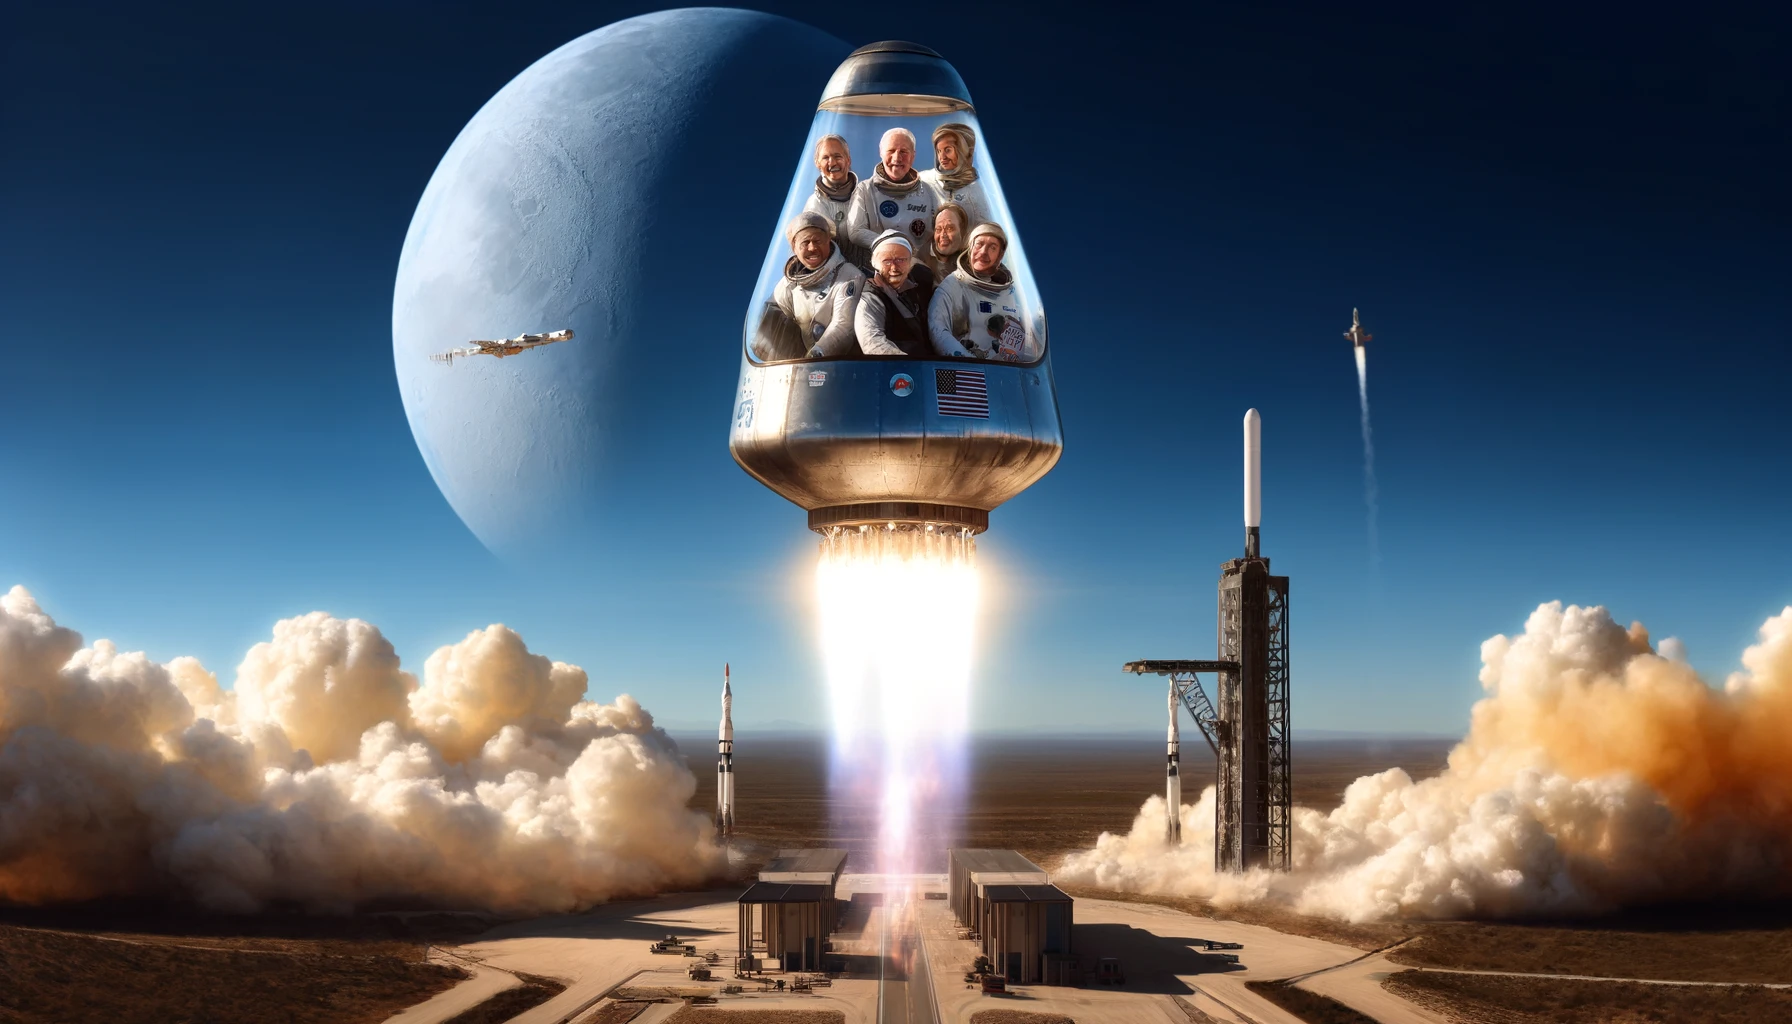 Blue Origin resumes passenger flights Rocket launching into a clear blue sky with a diverse crew of six passengers aboard, resembling the New Shepard capsule, with the West Texas desert landscape in the background.